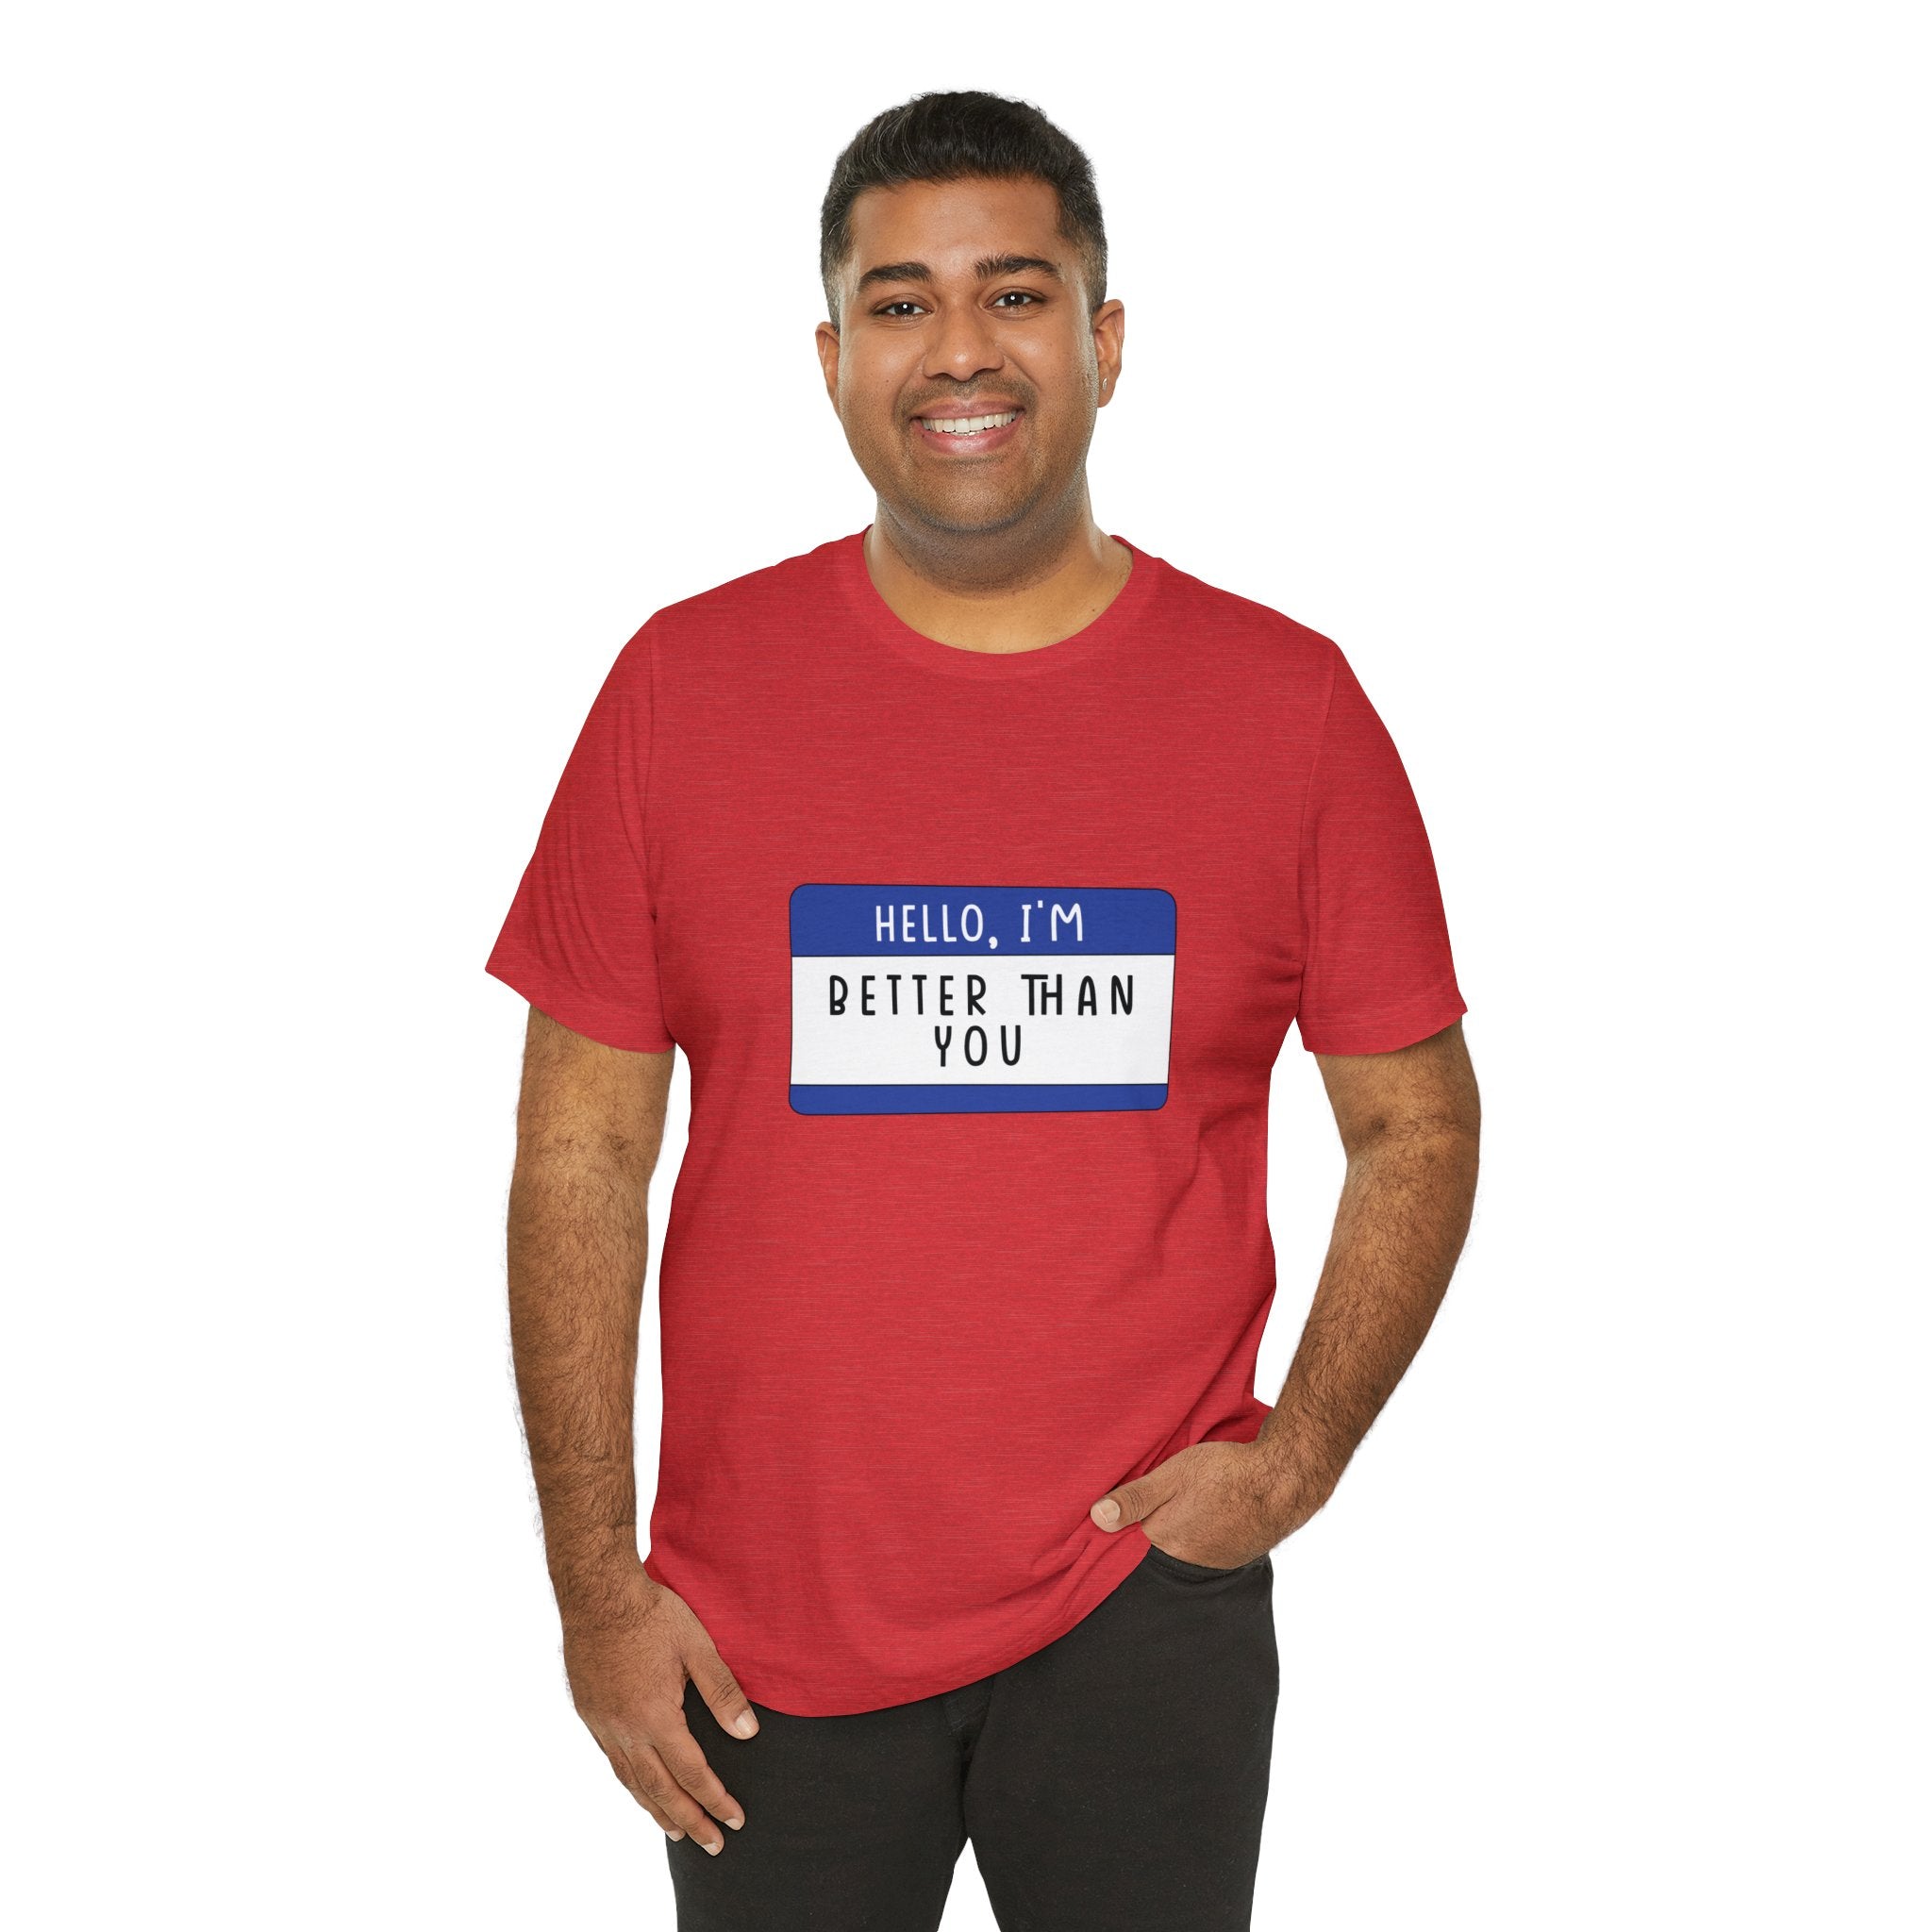 A man smiling in a red "Hello, I'm Better Than You" t-shirt with geeky charm and a blue name tag that reads "hello, I'm better than you." He stands against a white background.